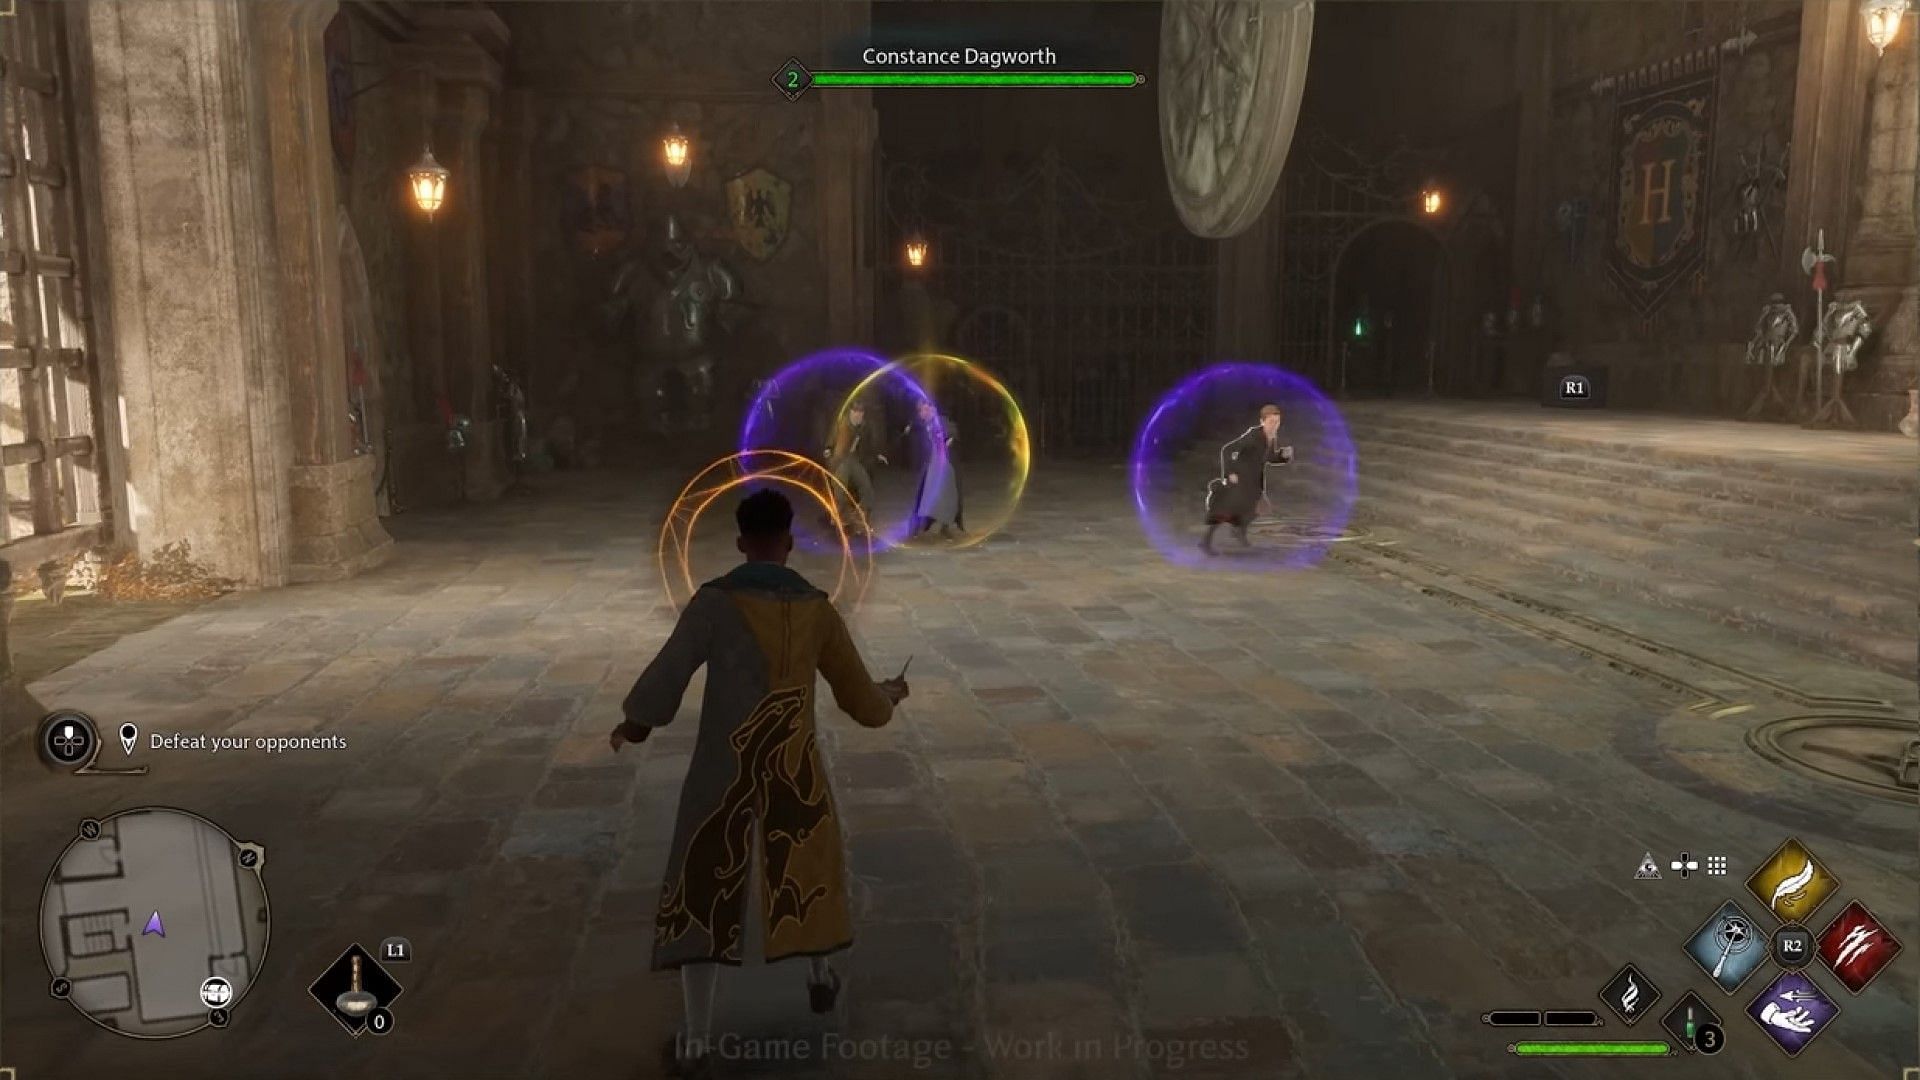 shields are an essential part of combat in Hogwarts Legacy(Image credits Warner Bros)